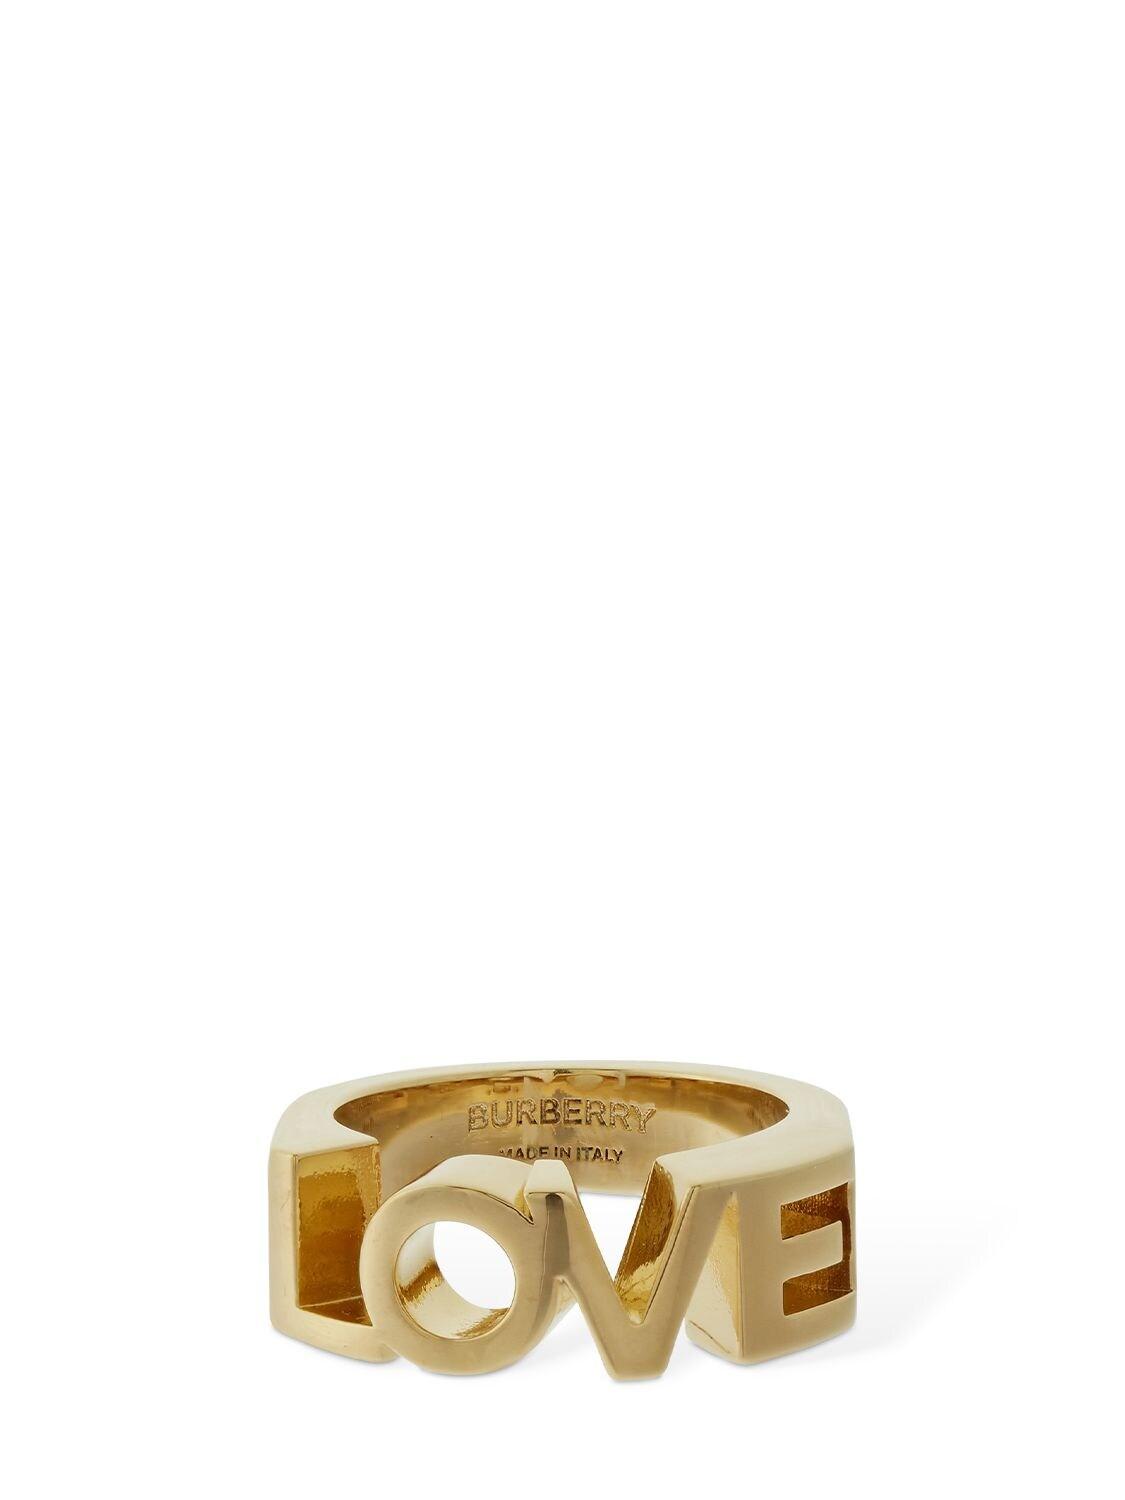 Burberry Love Logo Band Ring in Gold (Metallic) | Lyst